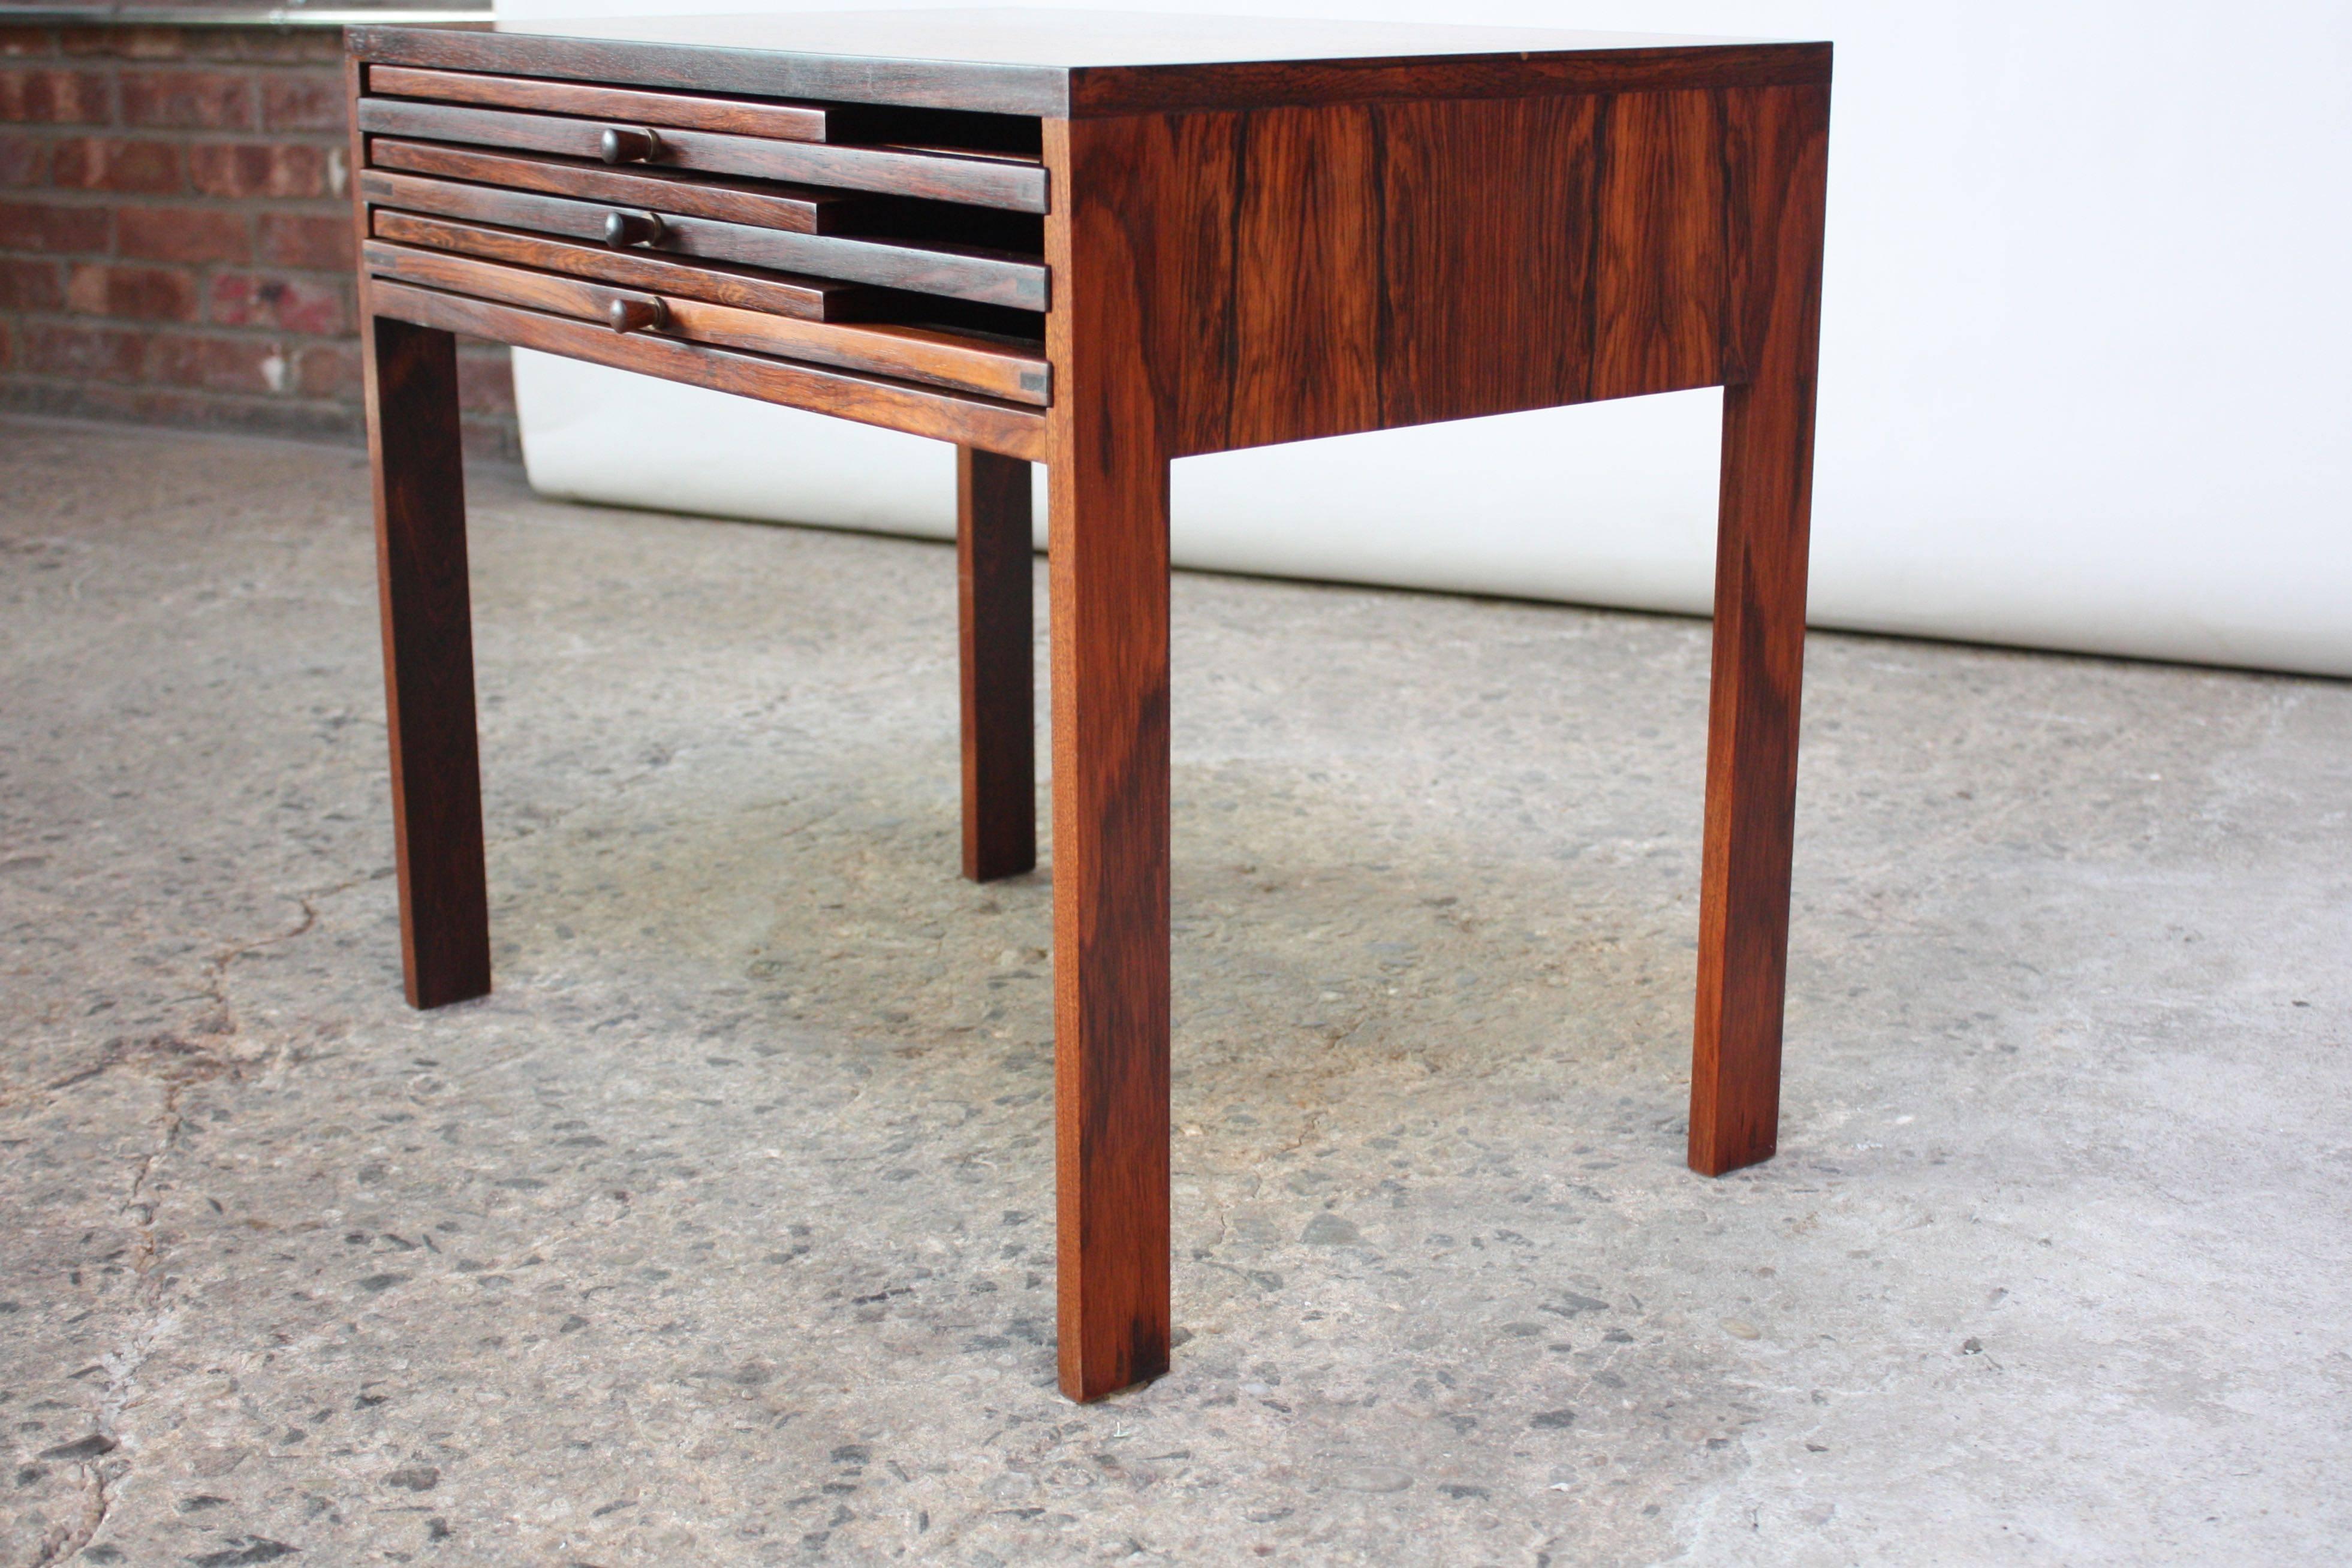 Complete set of three rosewood folding tables that nest into an occasional table for storage by Illum Wikkelsø for CFC Silkeborg. Details include sculptural rosewood pulls and solid brass accents / hinges. 
Each folding table measures: W 16.5